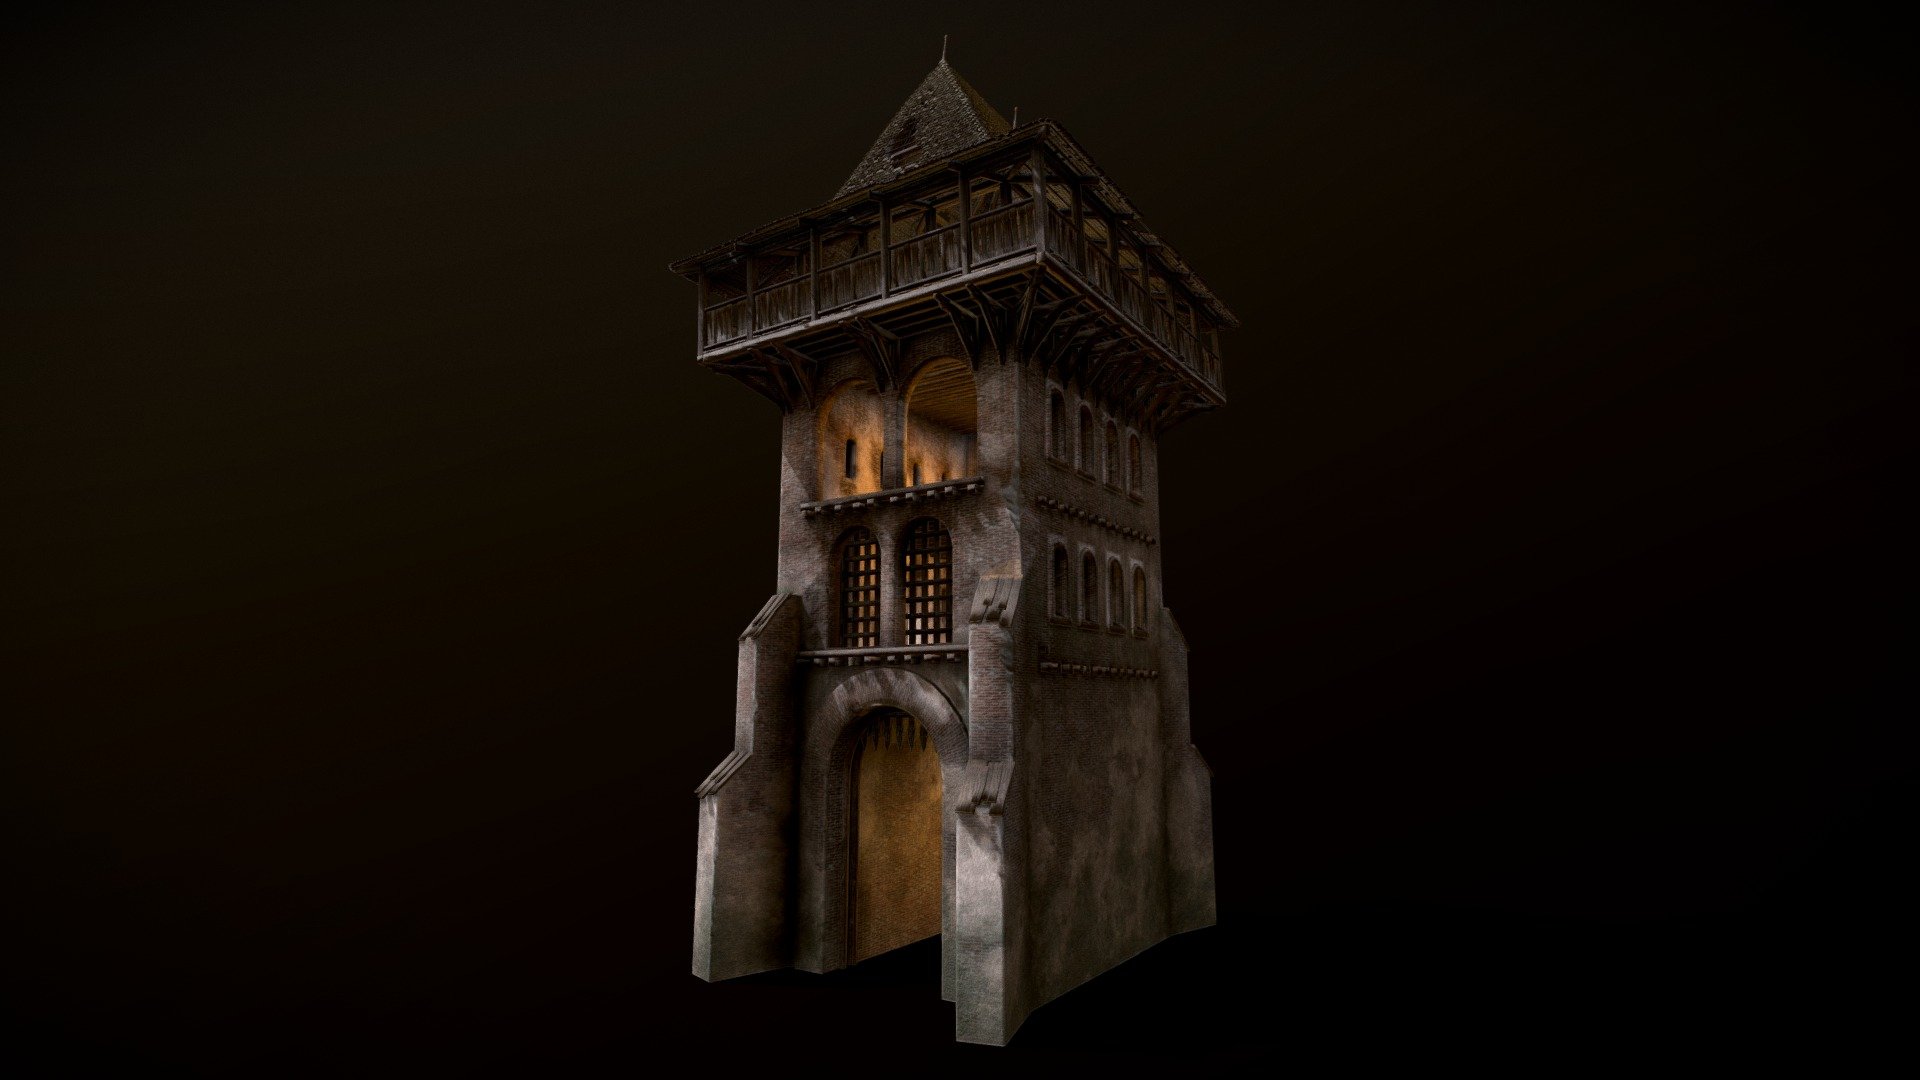 Fortress gates
the model is created in 3d max, zbrush and substance painter 3d model